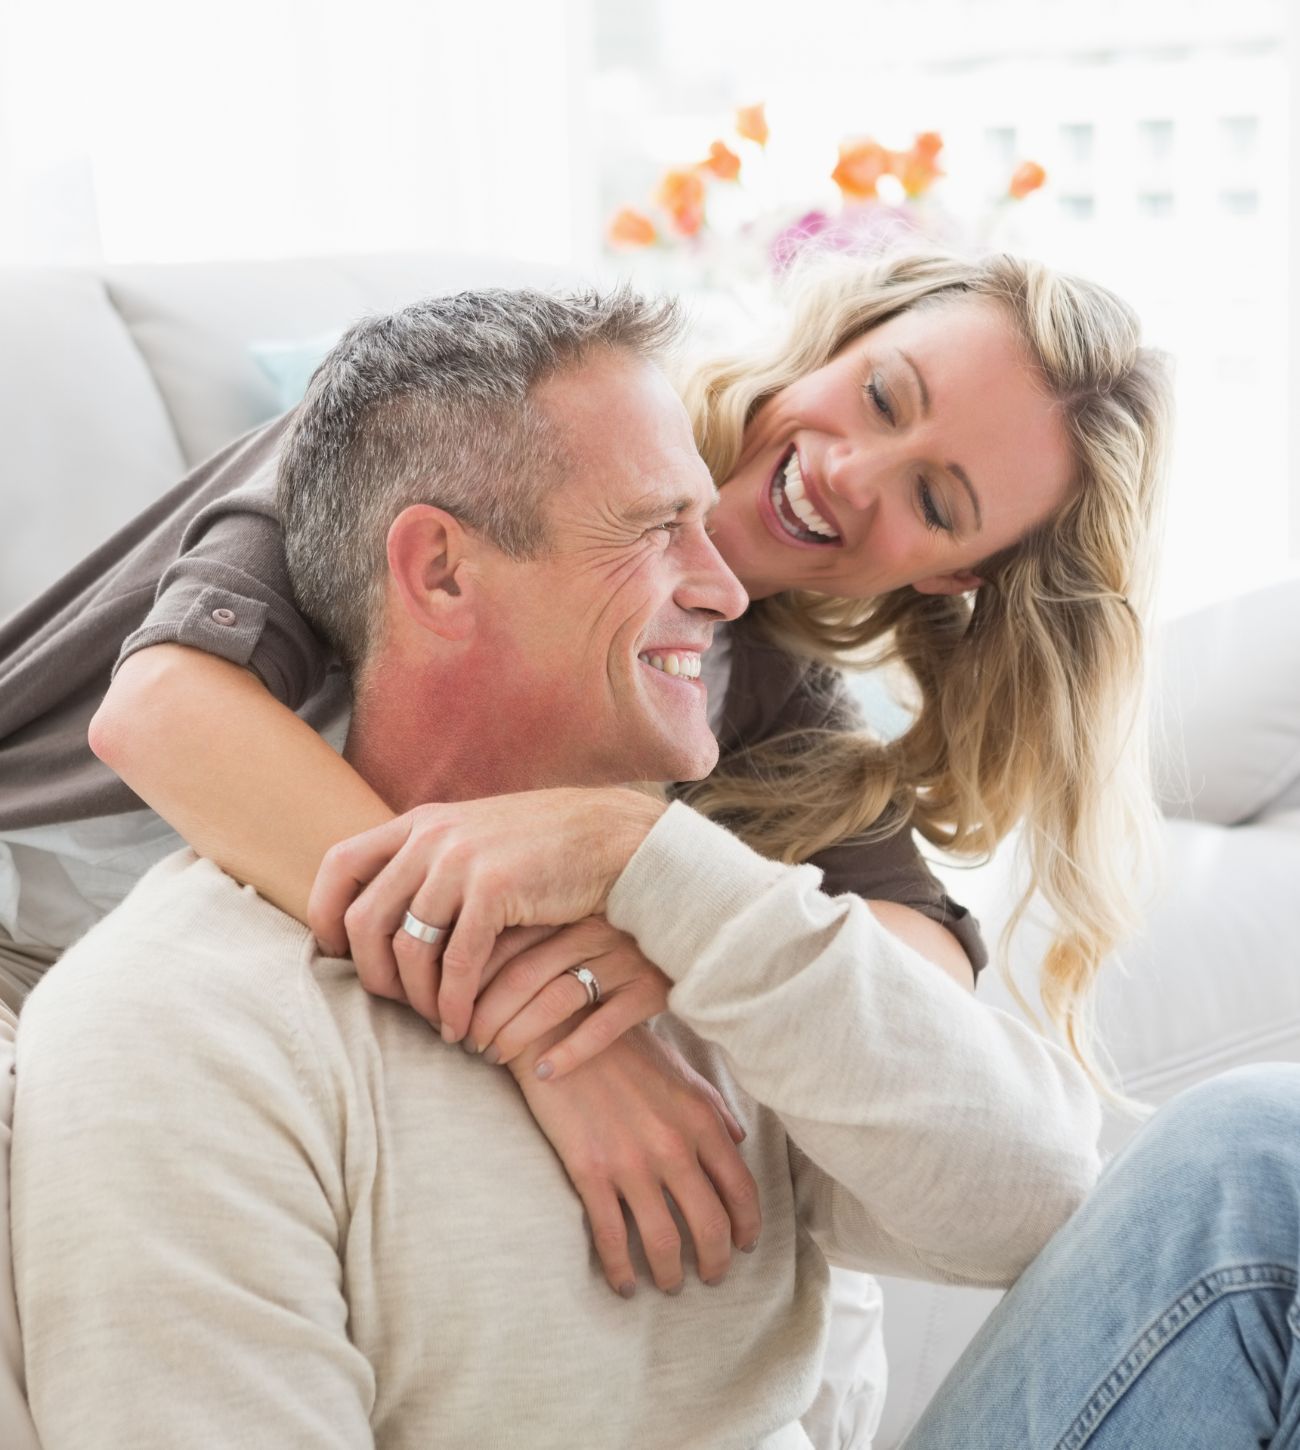 Photo of an adult couple smiling and hugging as they enjoy time together at home on the sofa and floor.